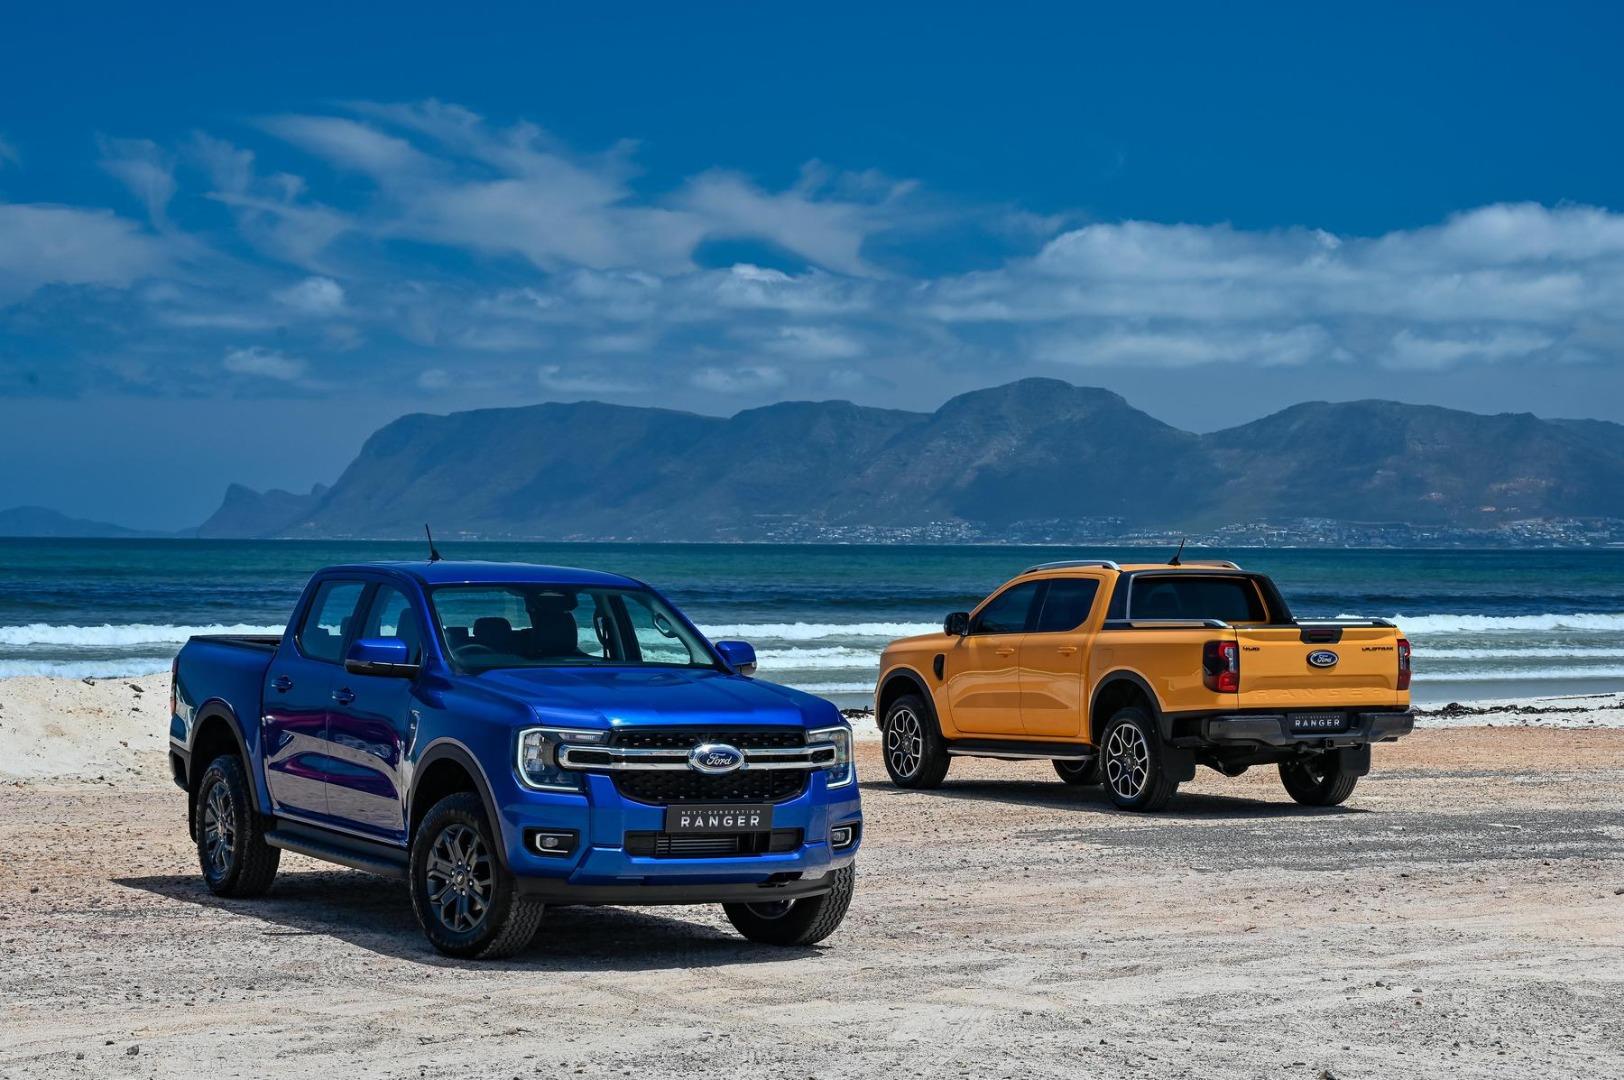 where is the ford ranger made?